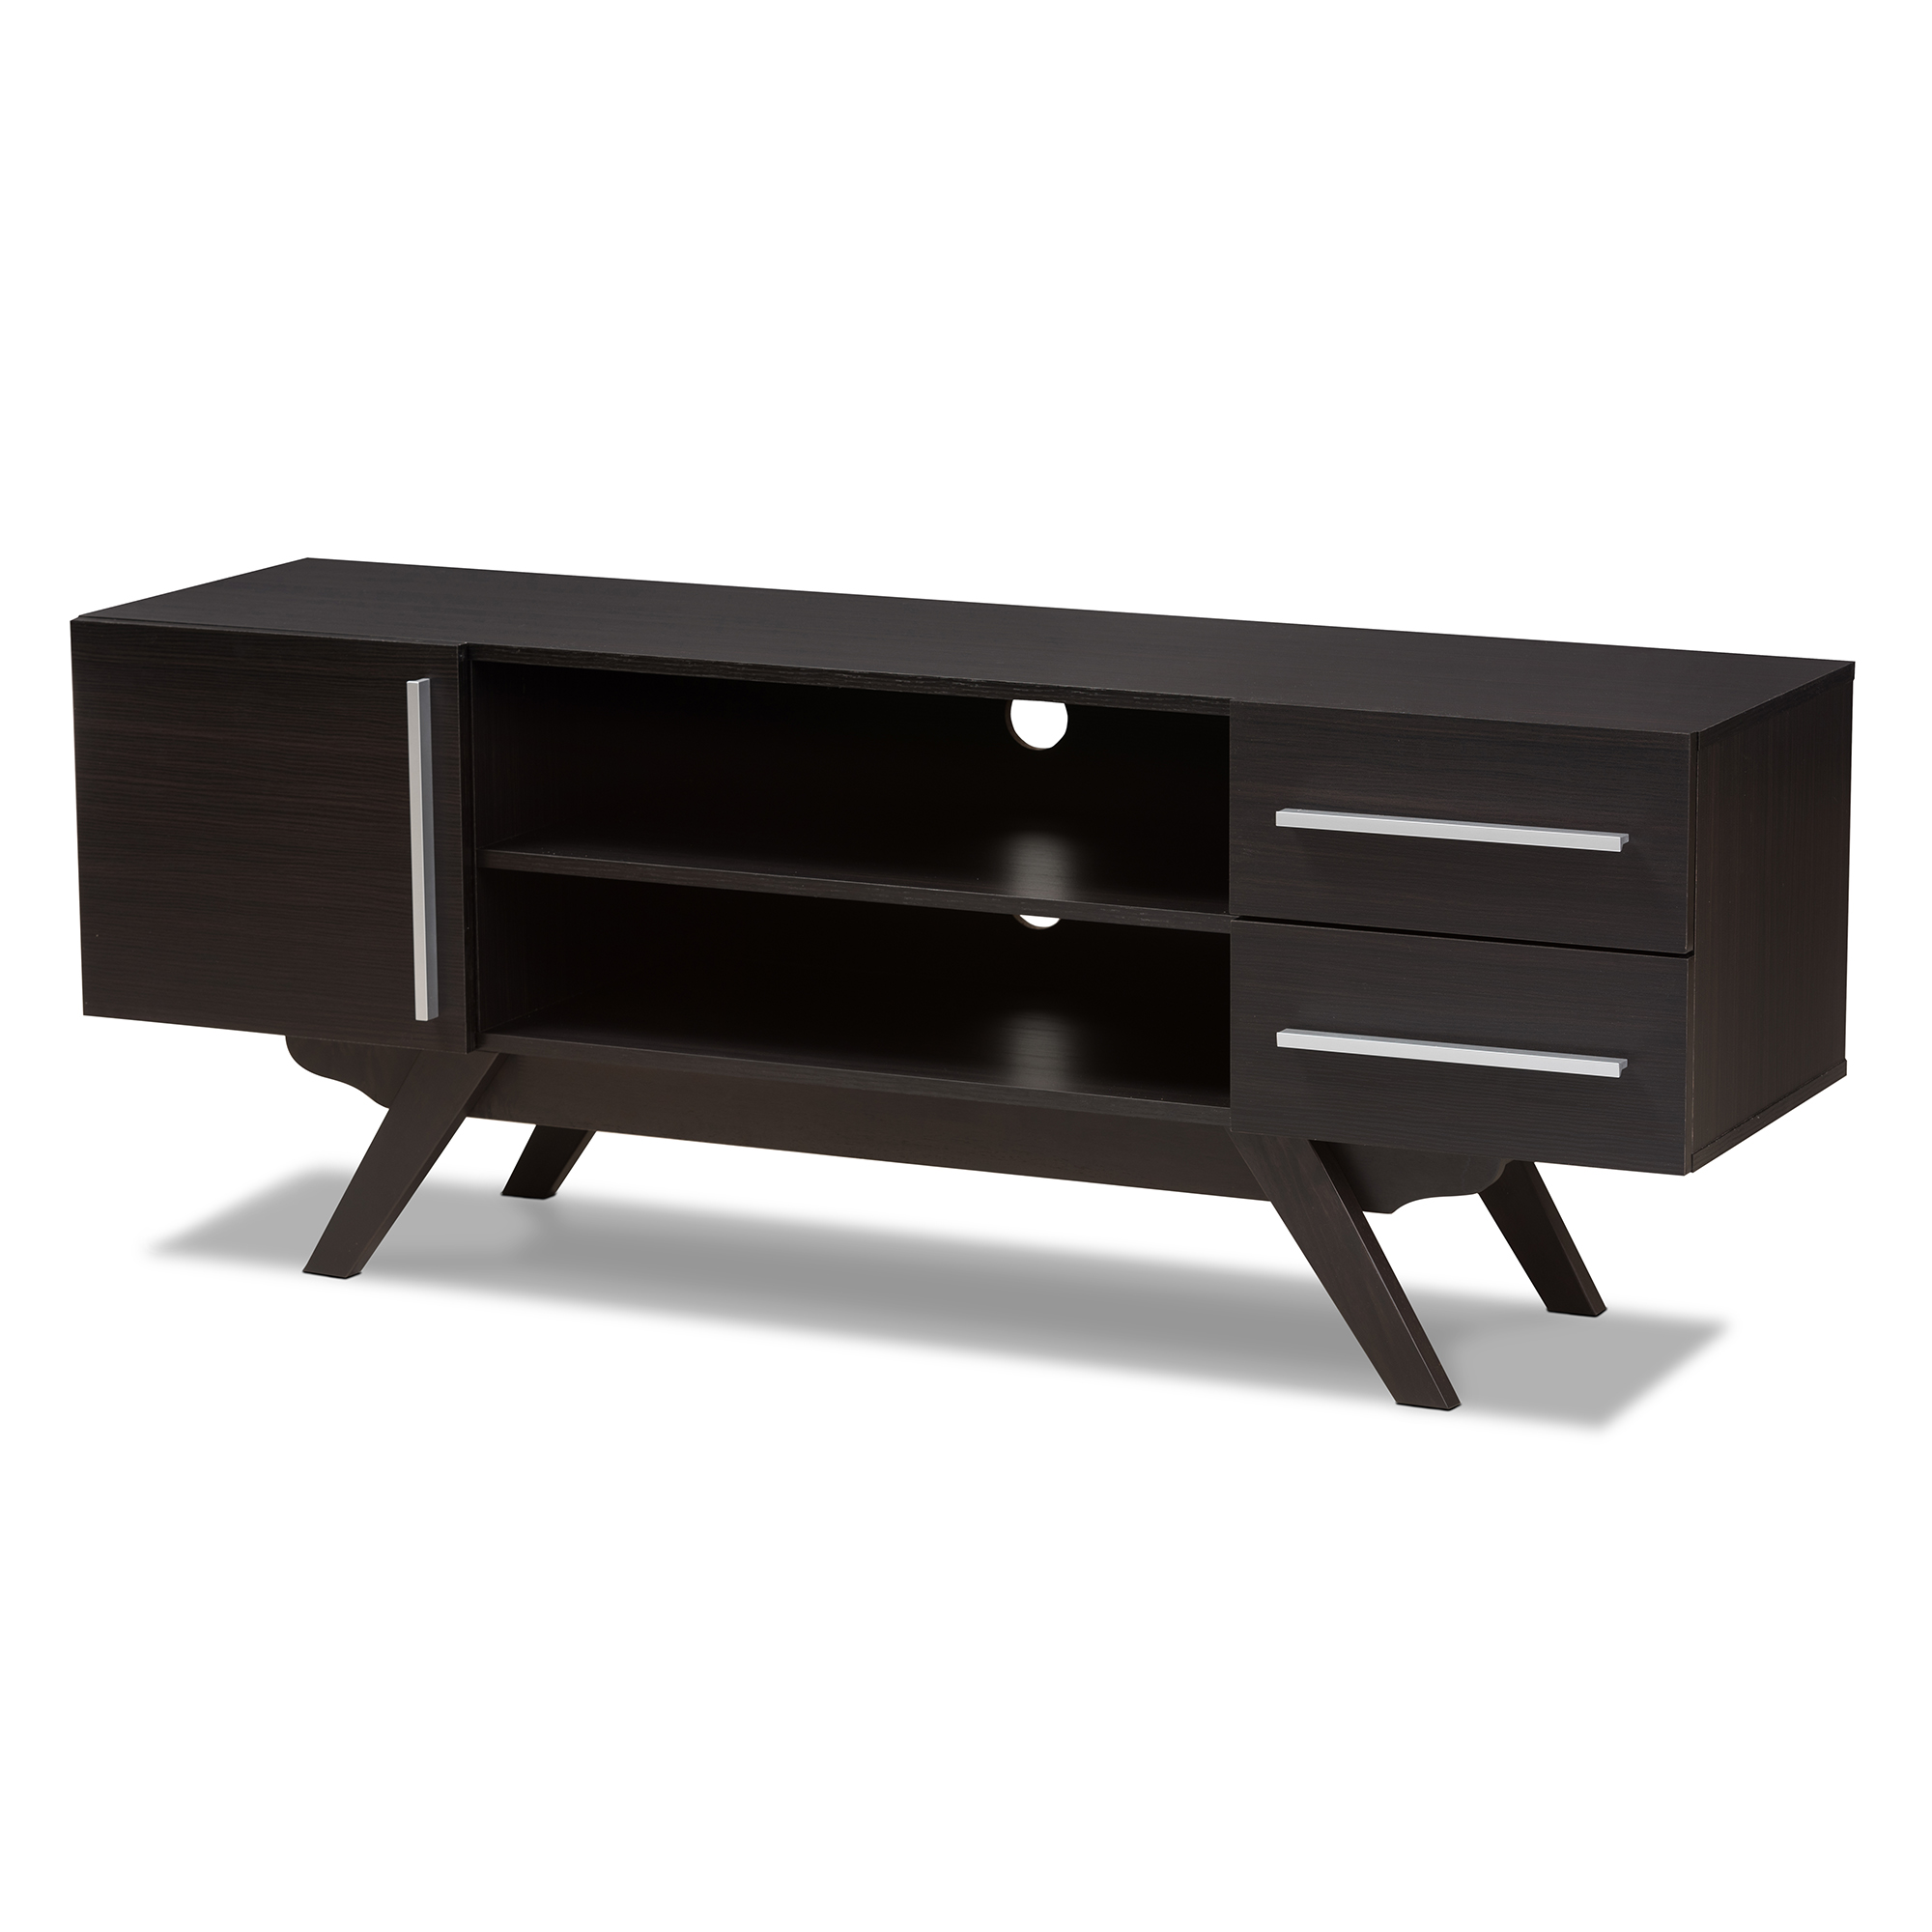 Baxton Studio Ashfield Mid-Century Modern Dark Brown Finished Wood TV Stand Affordable modern furniture in Chicago, classic living room furniture, modern tv stand, cheap tv stands